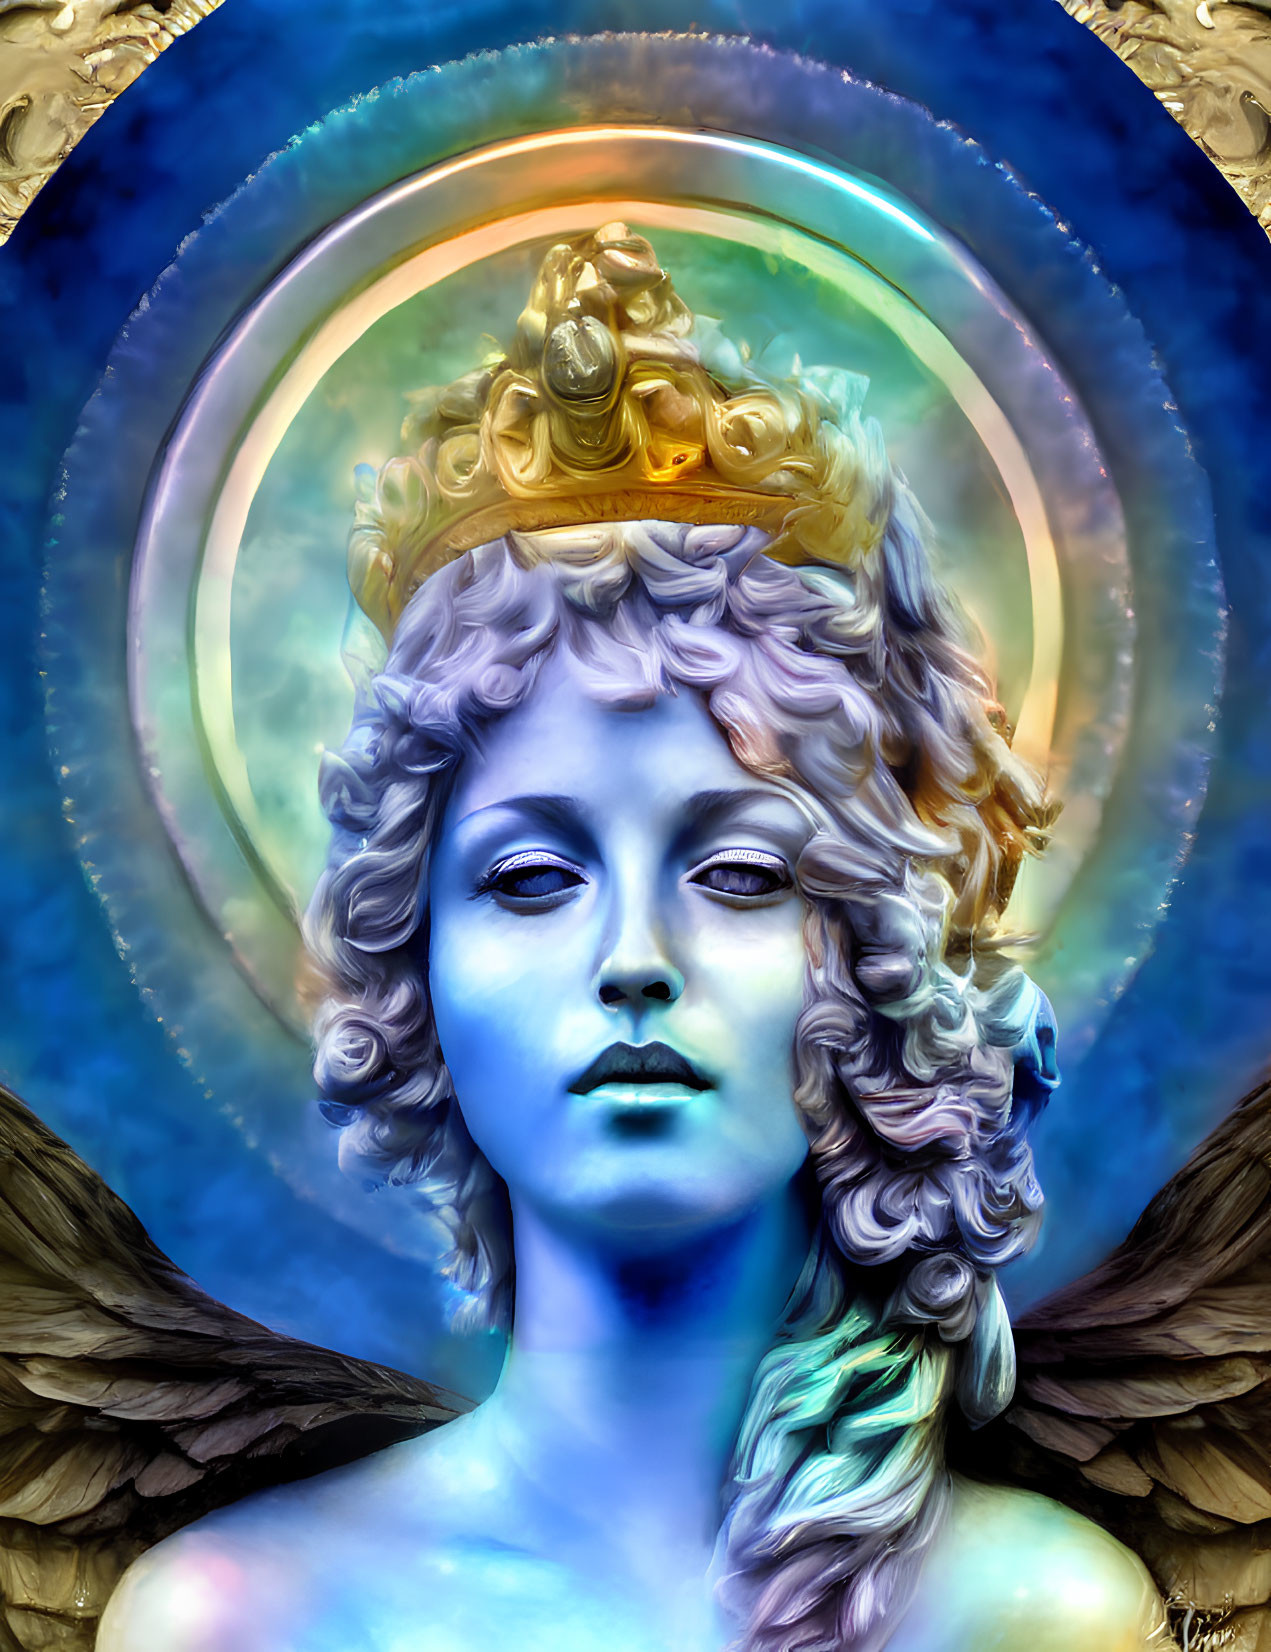 Digitally-rendered angelic figure with blue skin and golden crown surrounded by luminescent wings.